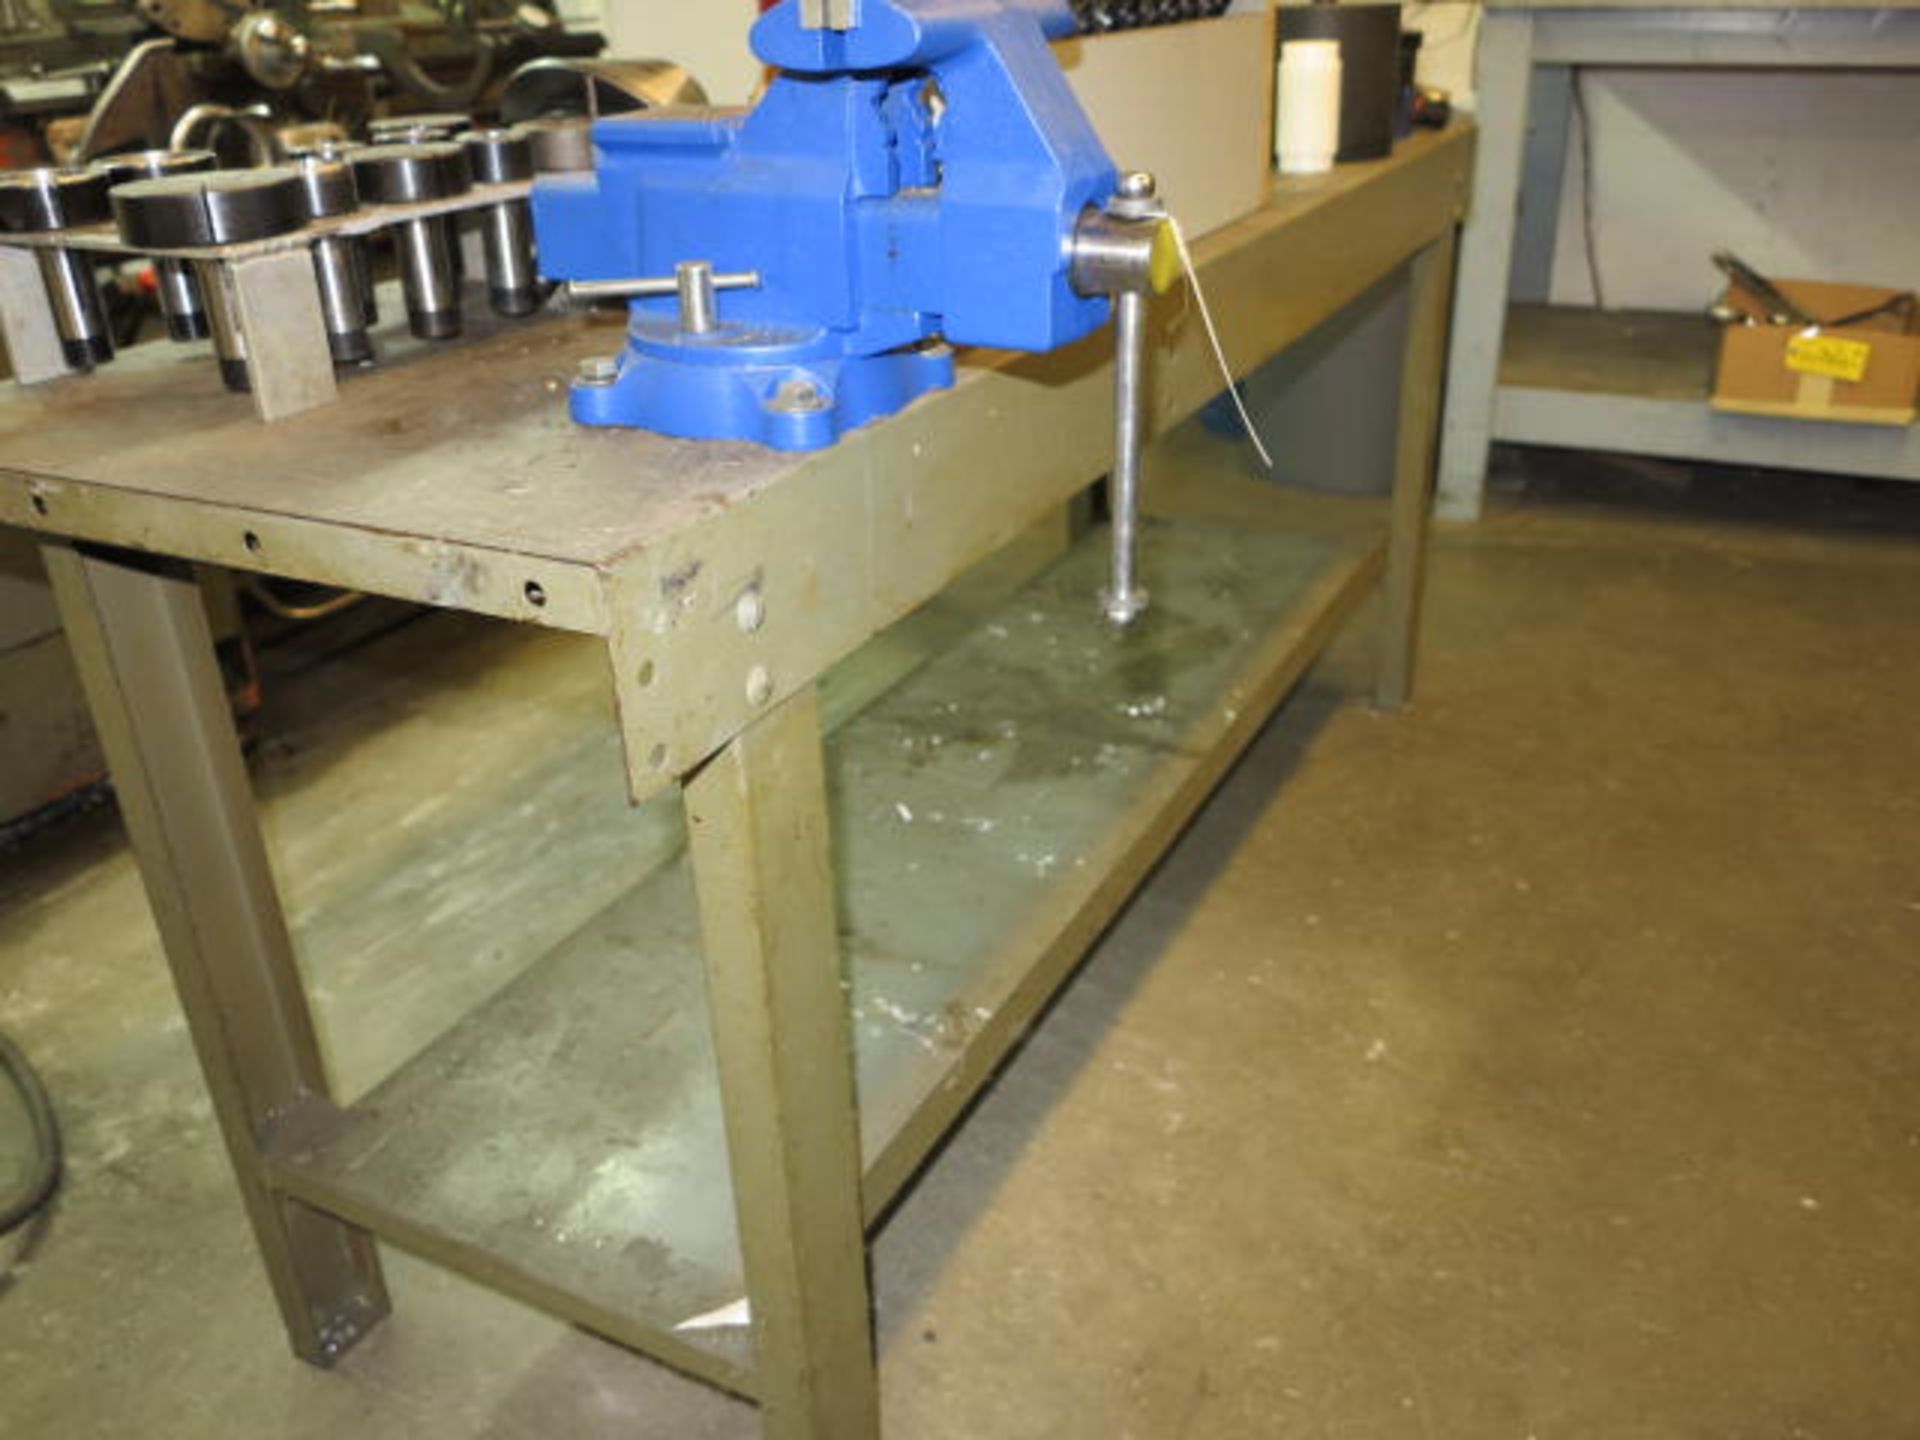 2' x 7' Steel Bench with Vise Location: Elmco Tool 3 Peter Rd Bristol, RI